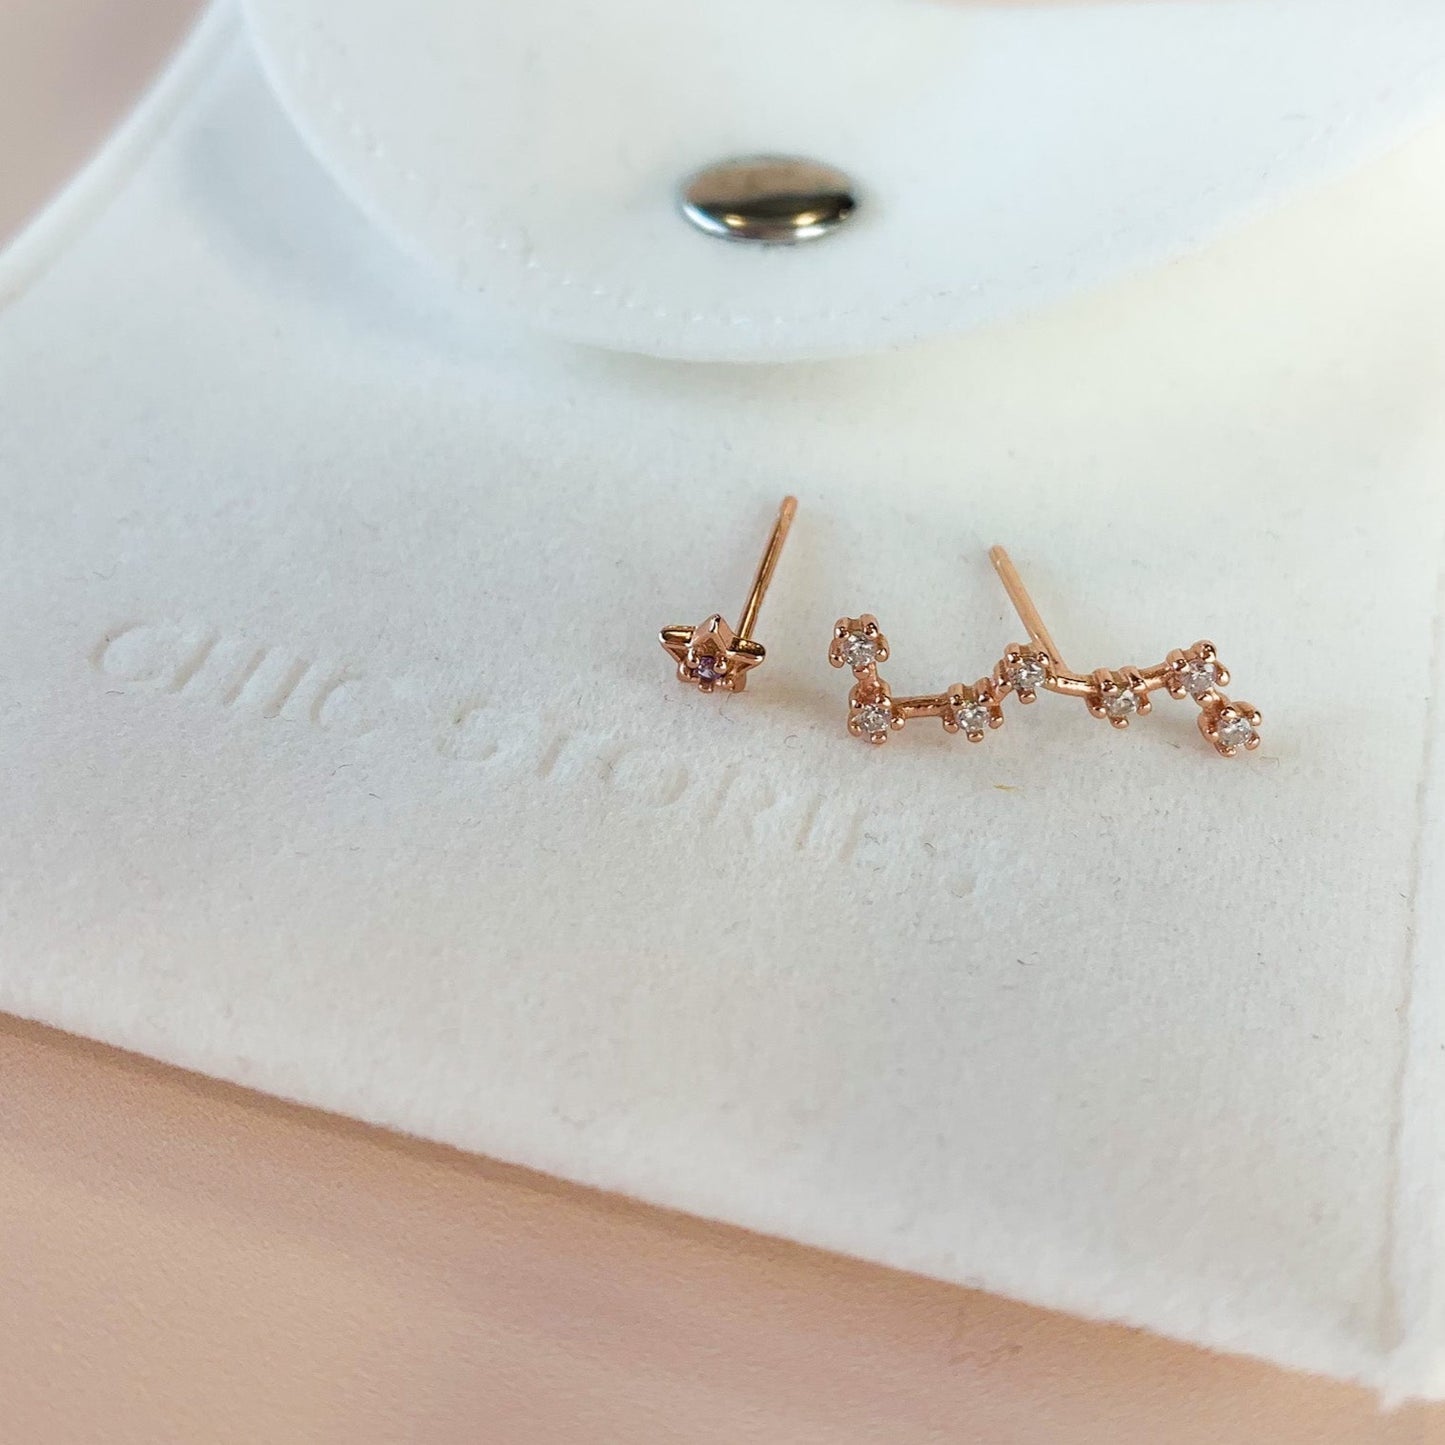 Star Climber and Stud Earrings